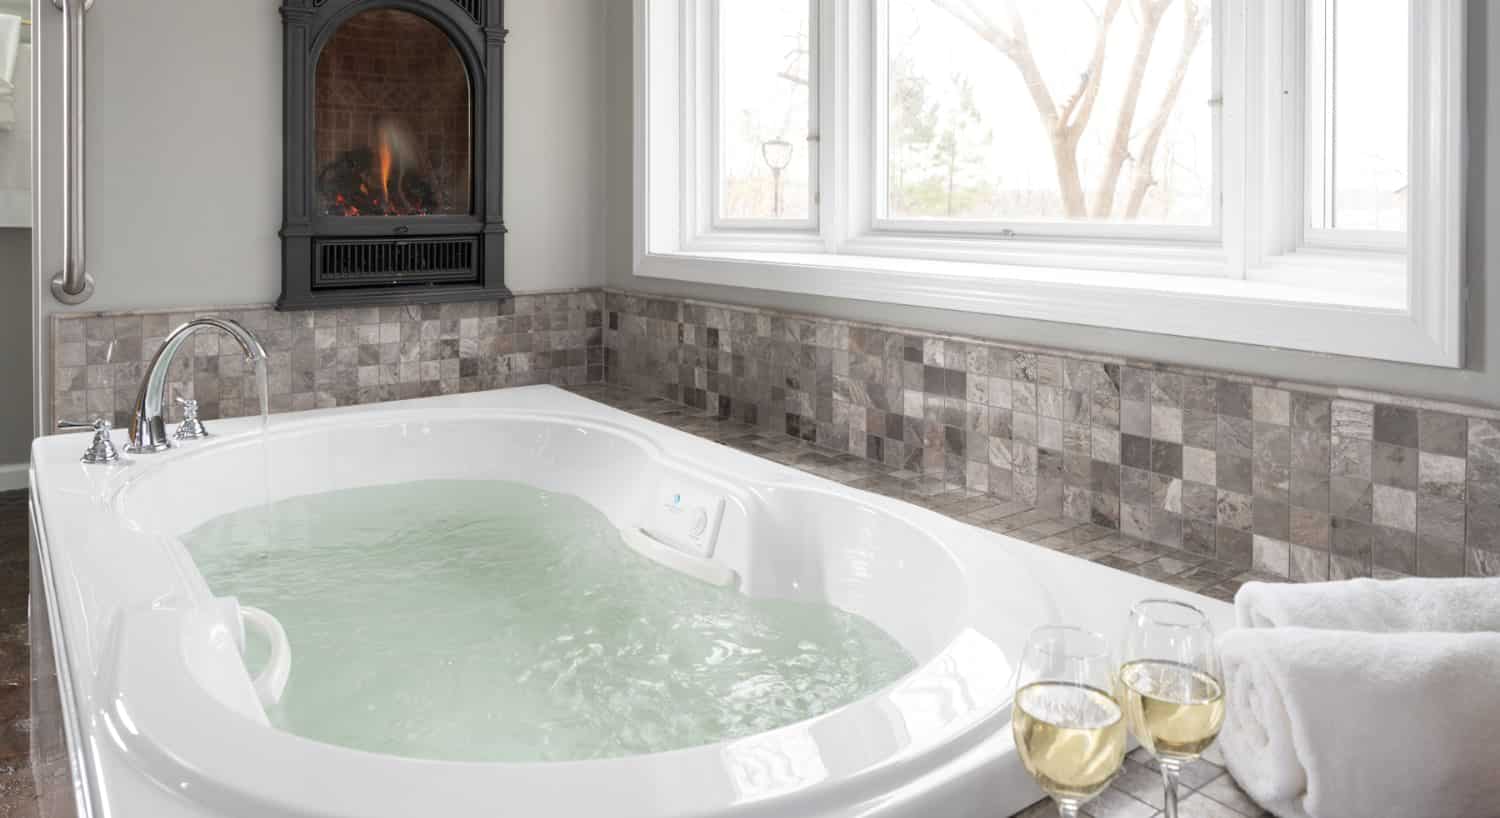 Large jetted tub filled with water and surrounded by tile in shades of gray